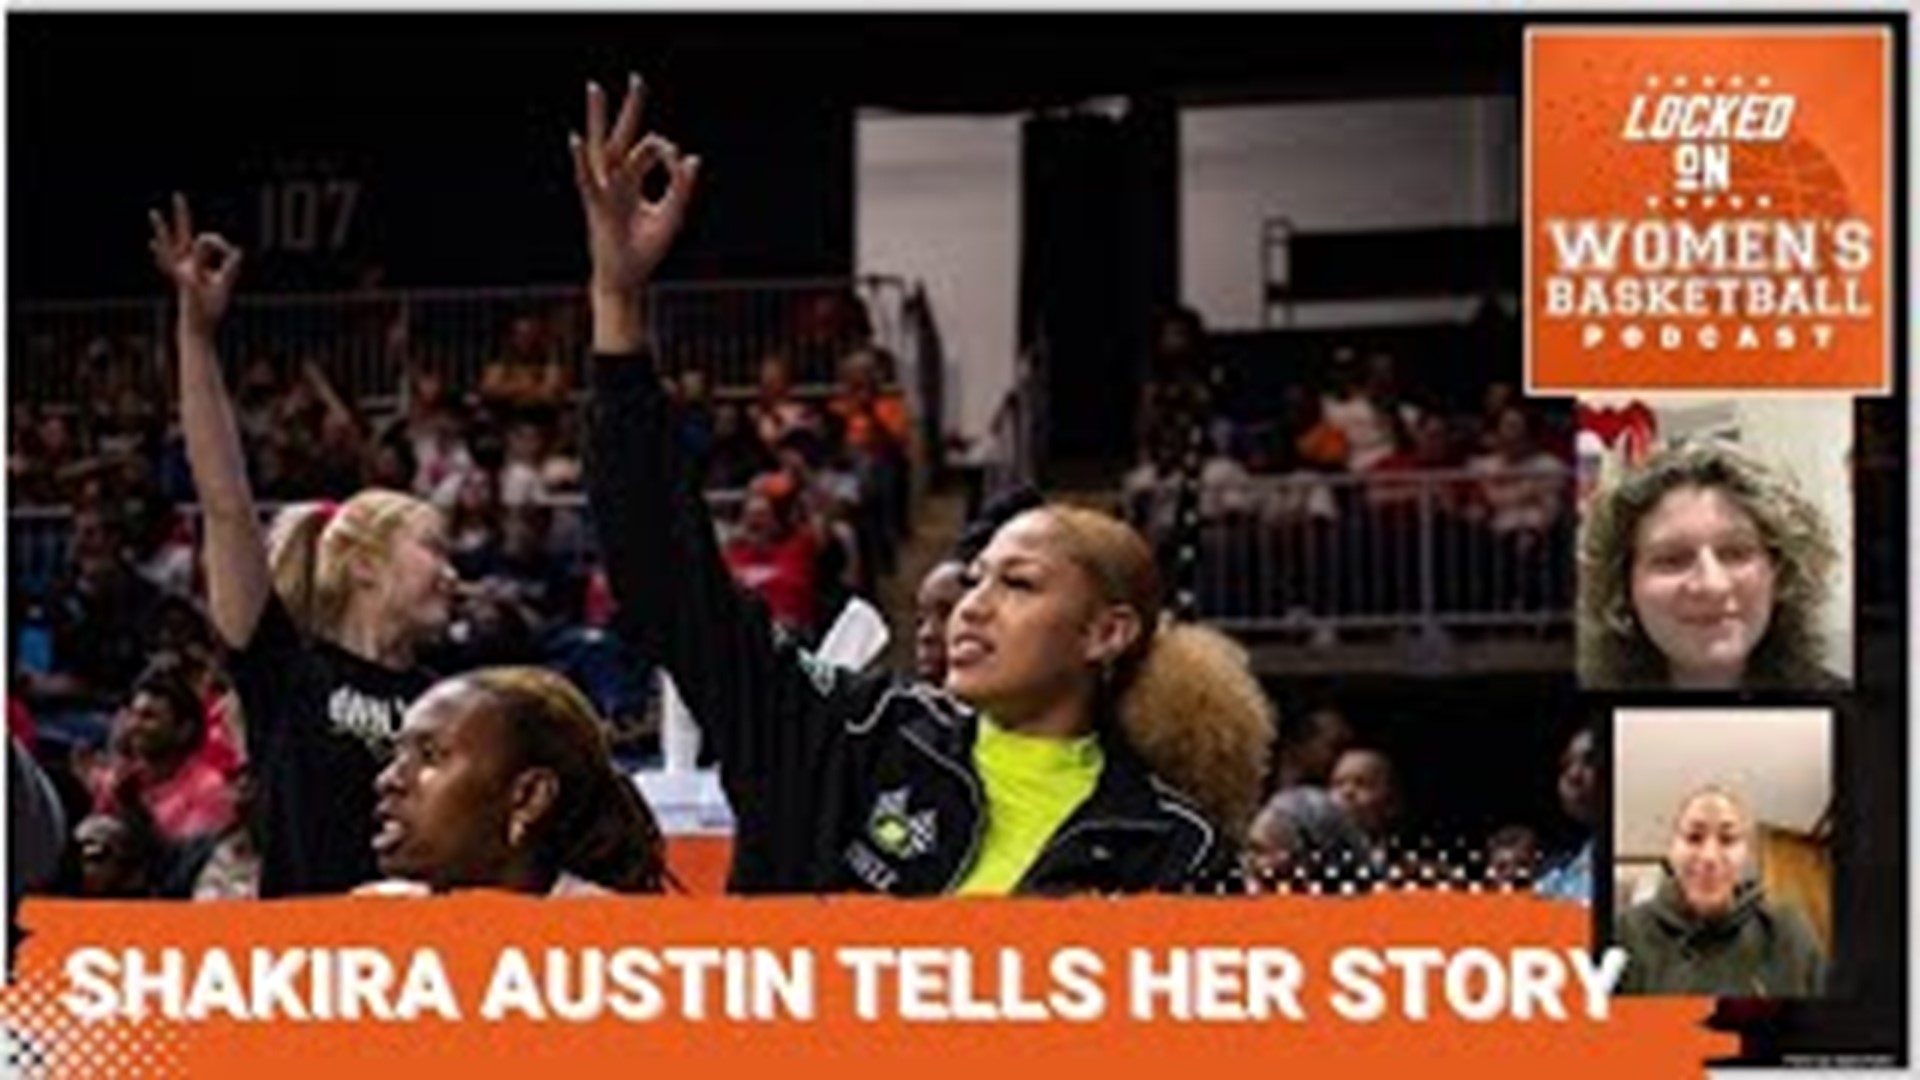 Host Jackie Powell sits down with Washington Mystics rising star Shakira Austin to discuss her participation in the WNBA’s 2024 player marketing agreement.